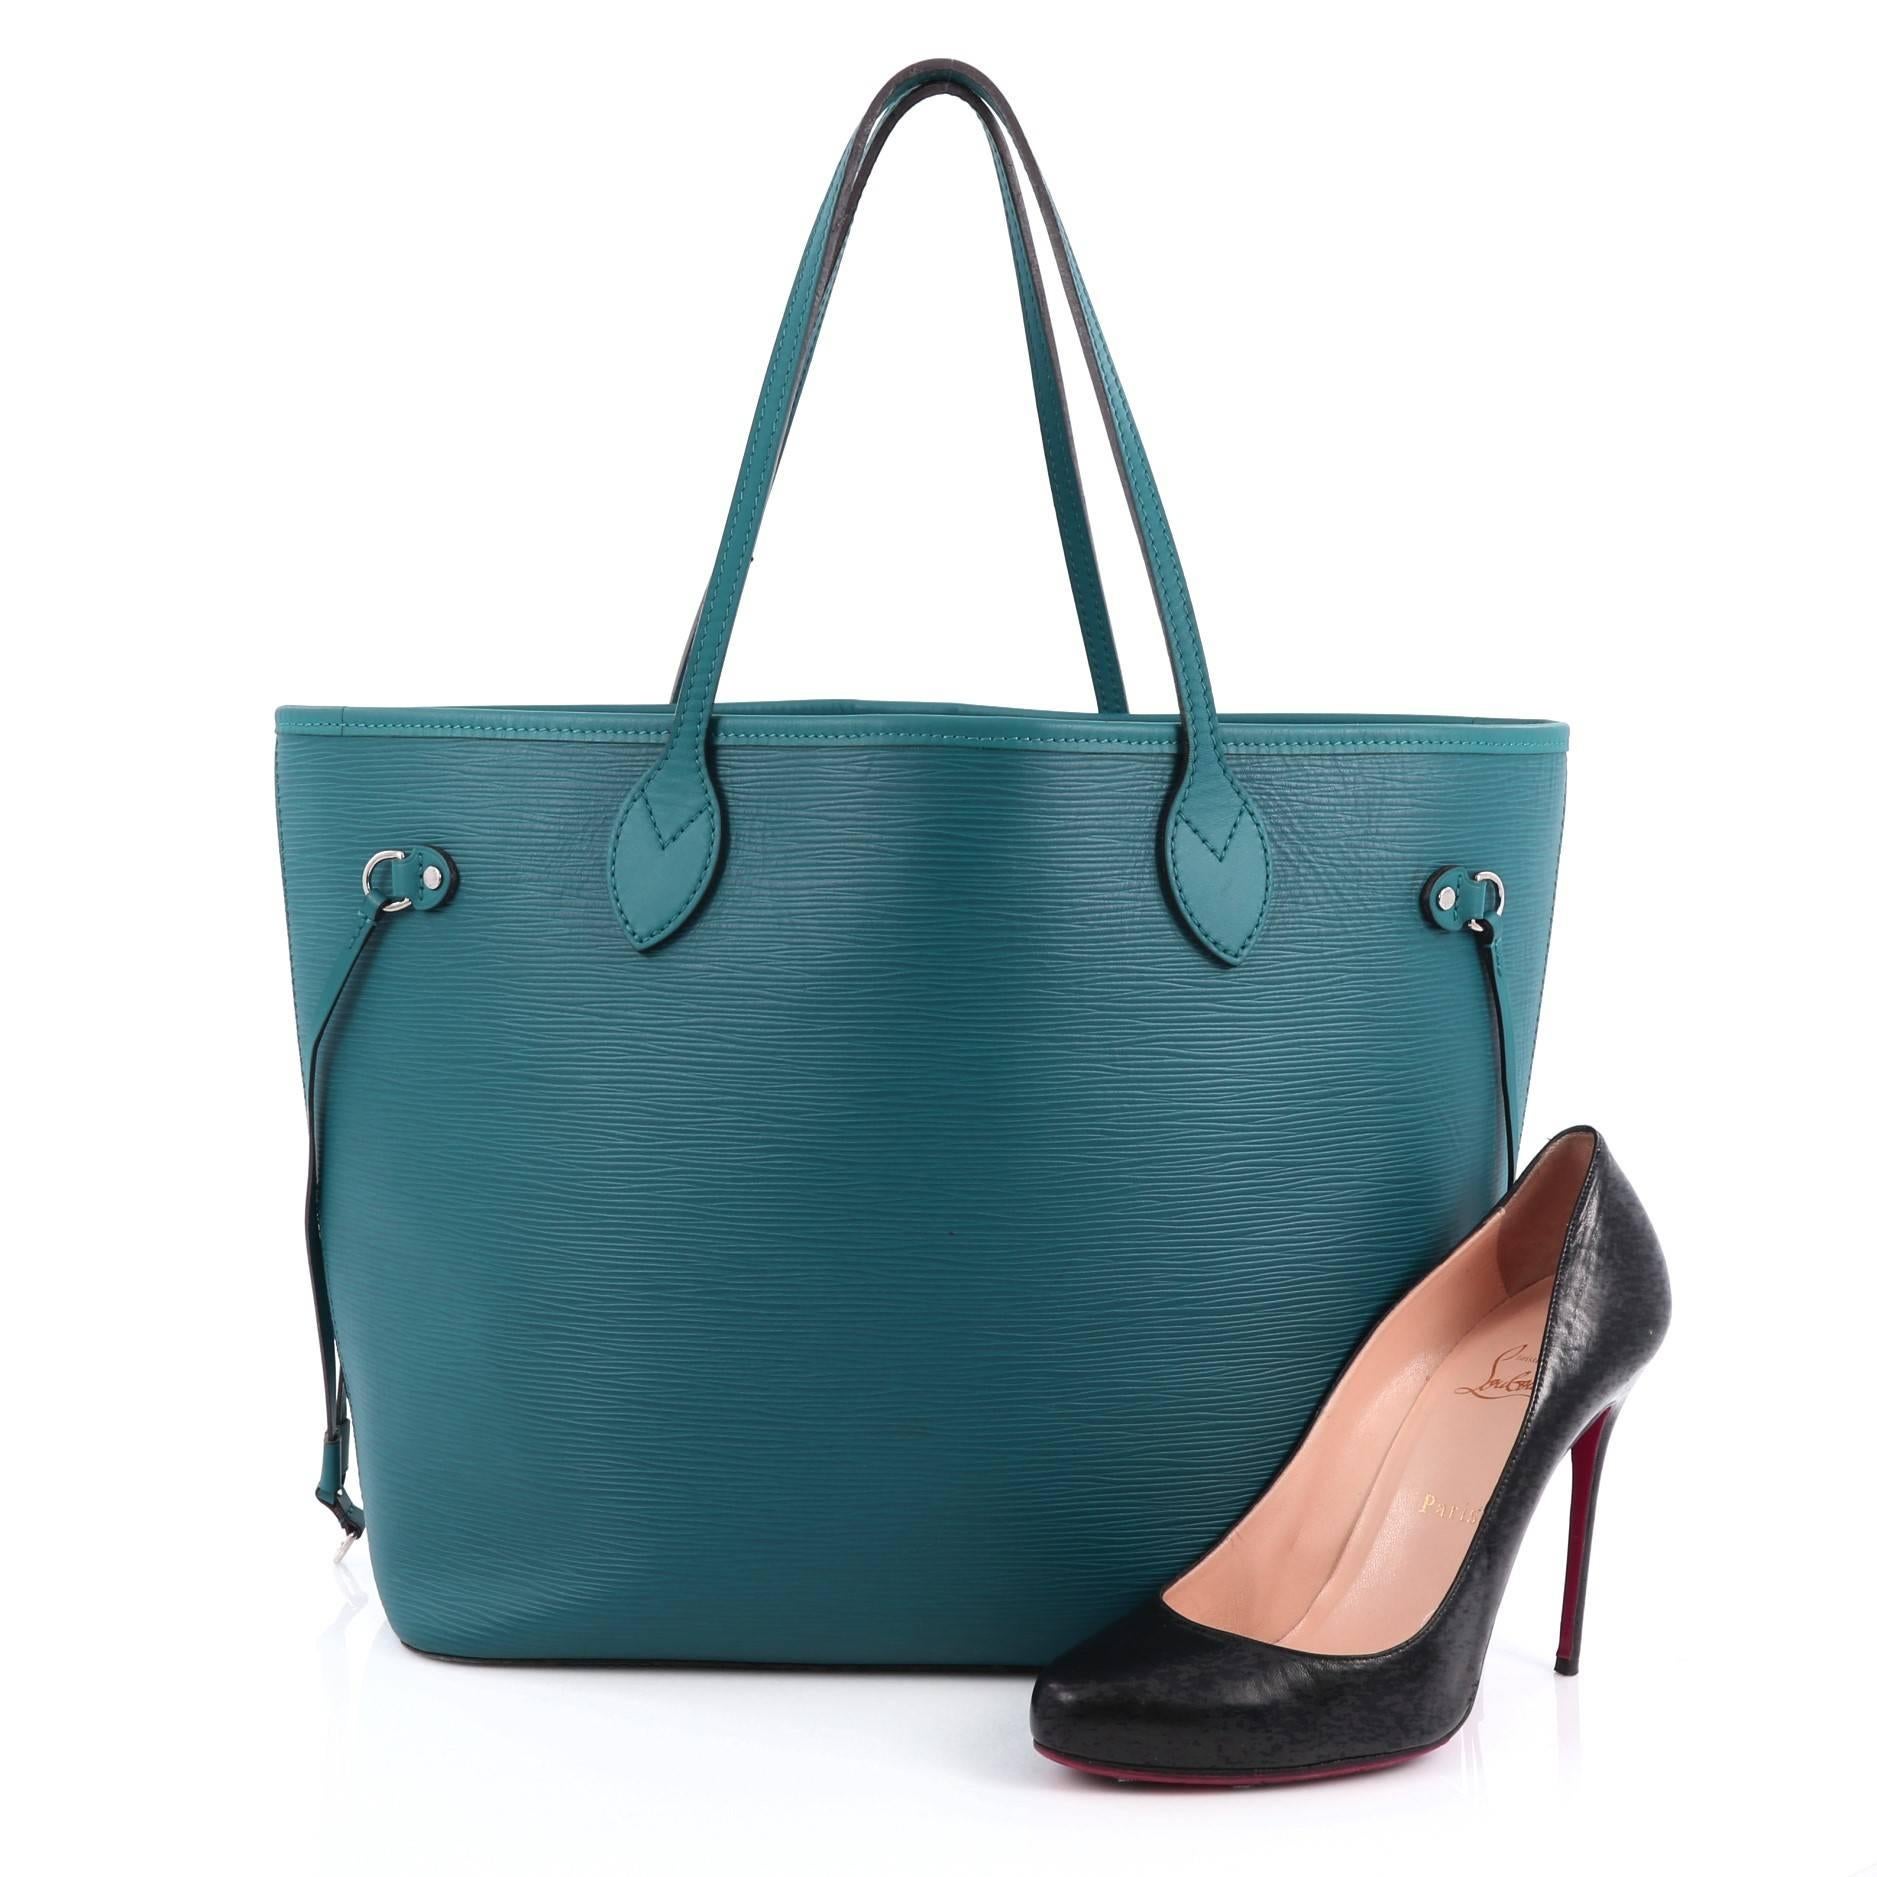 This authentic Louis Vuitton Neverfull Tote Epi Leather MM is a perfect companion for daily excursions. Crafted in teal epi leather, this iconic, easy-to-carry tote features dual flat leather handles, side tassels that cinches and expands and